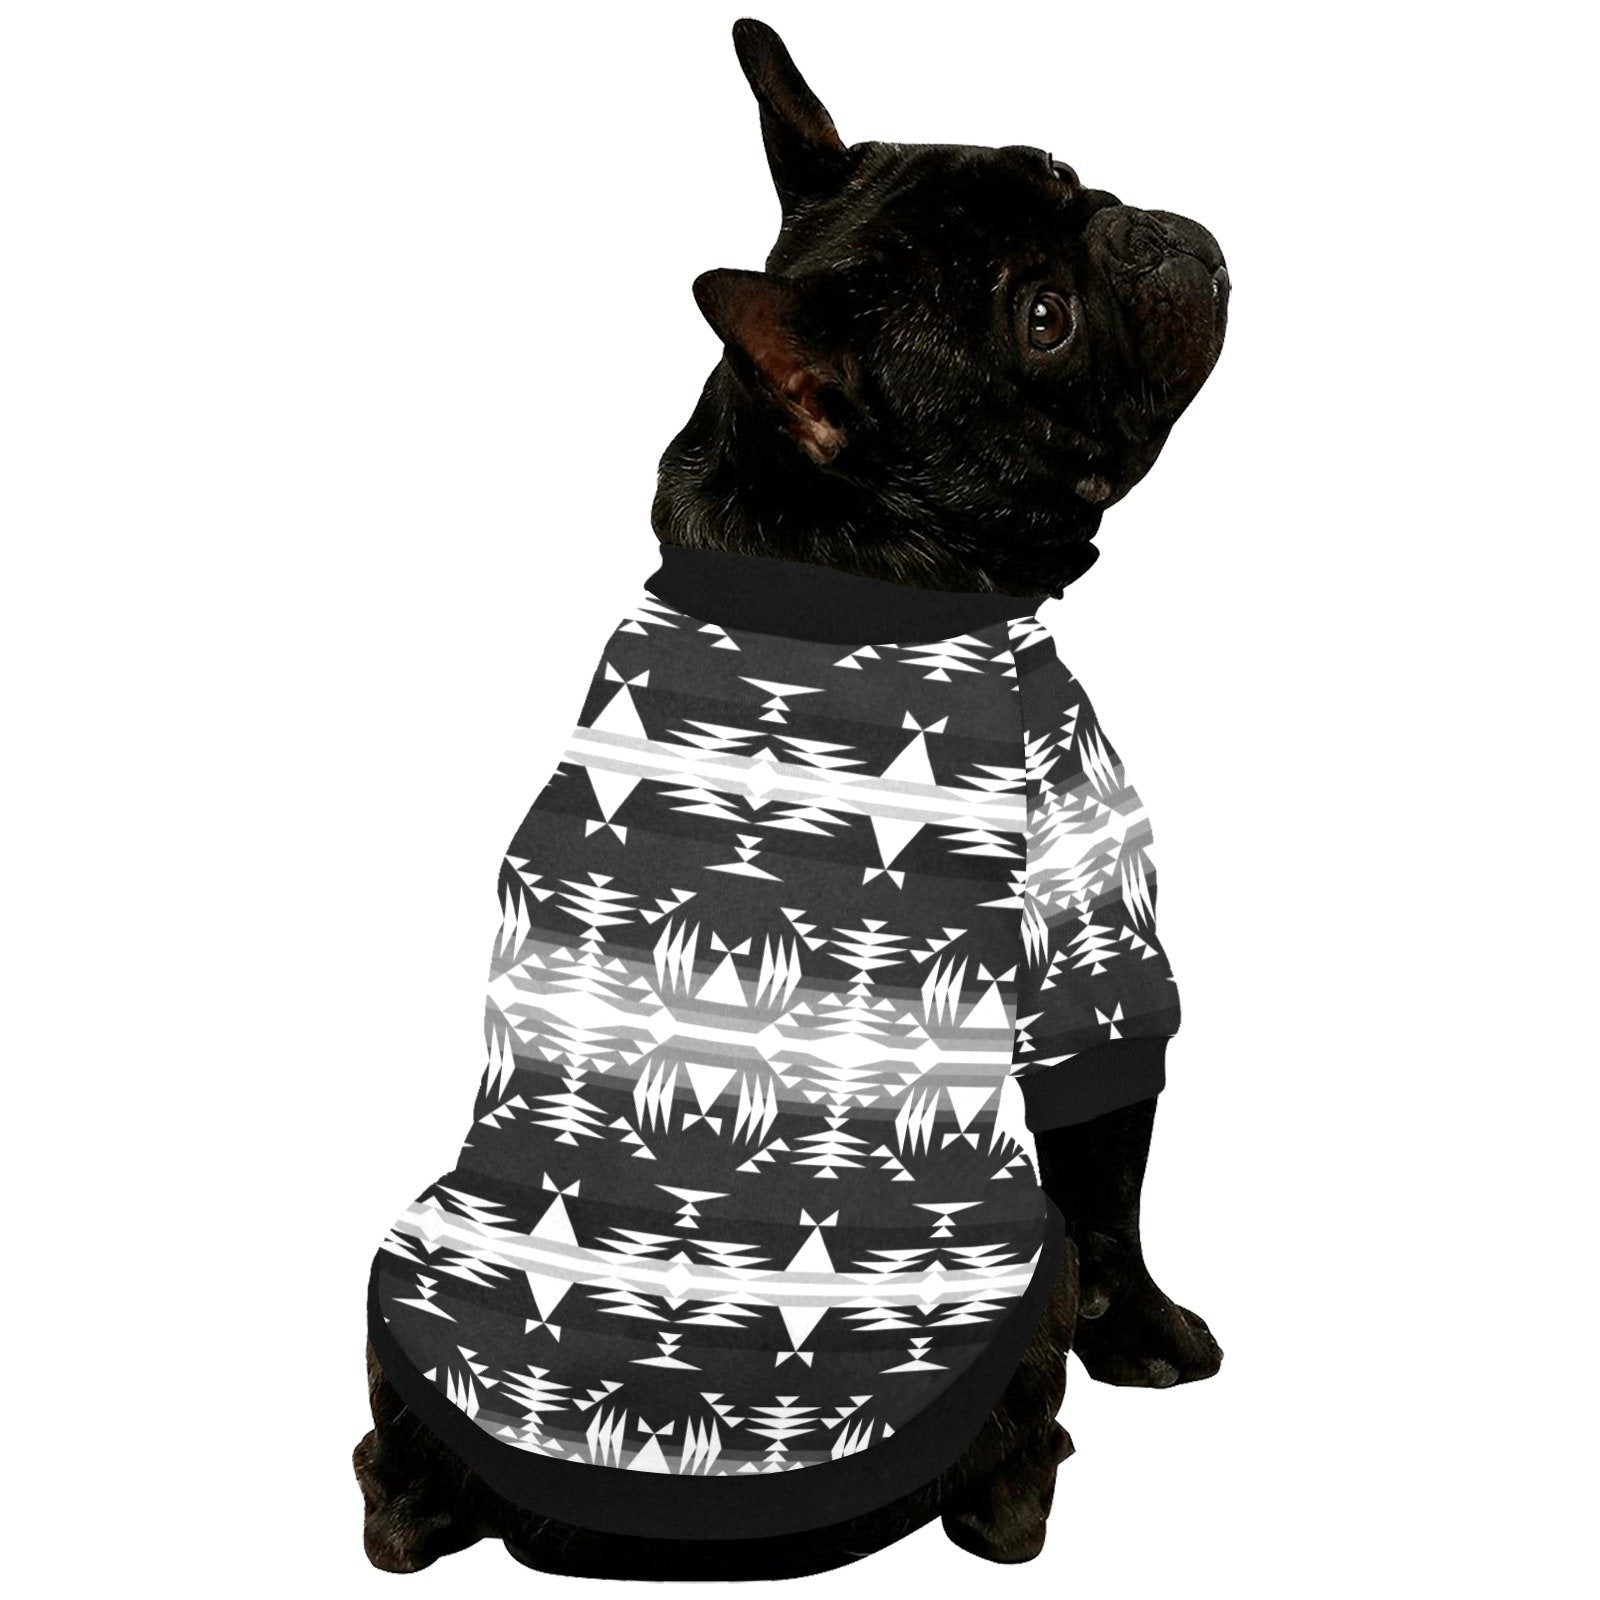 Between the Mountains Black and White Pet Dog Round Neck Shirt Pet Dog Round Neck Shirt e-joyer 